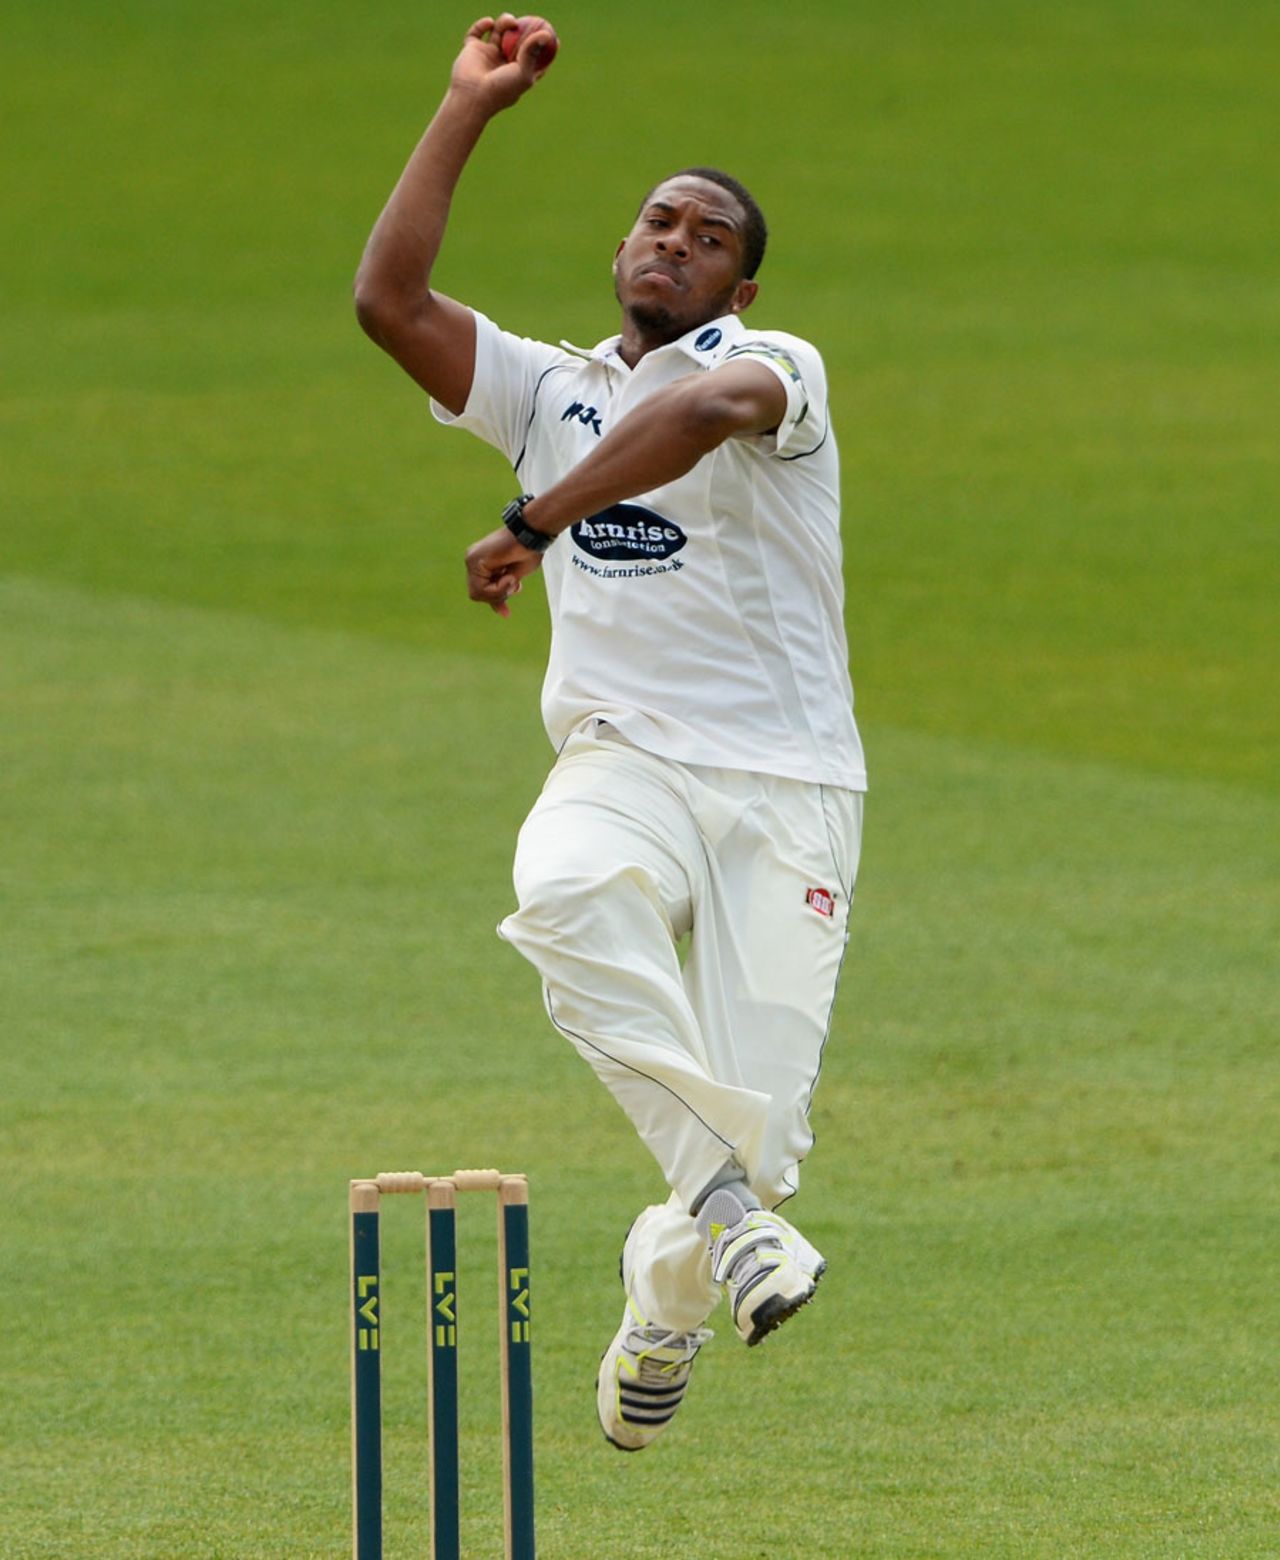 Chris Jordan was back at his old county, Surrey v Sussex, County Championship, Division One, The Oval, 1st day, April, 24, 2013